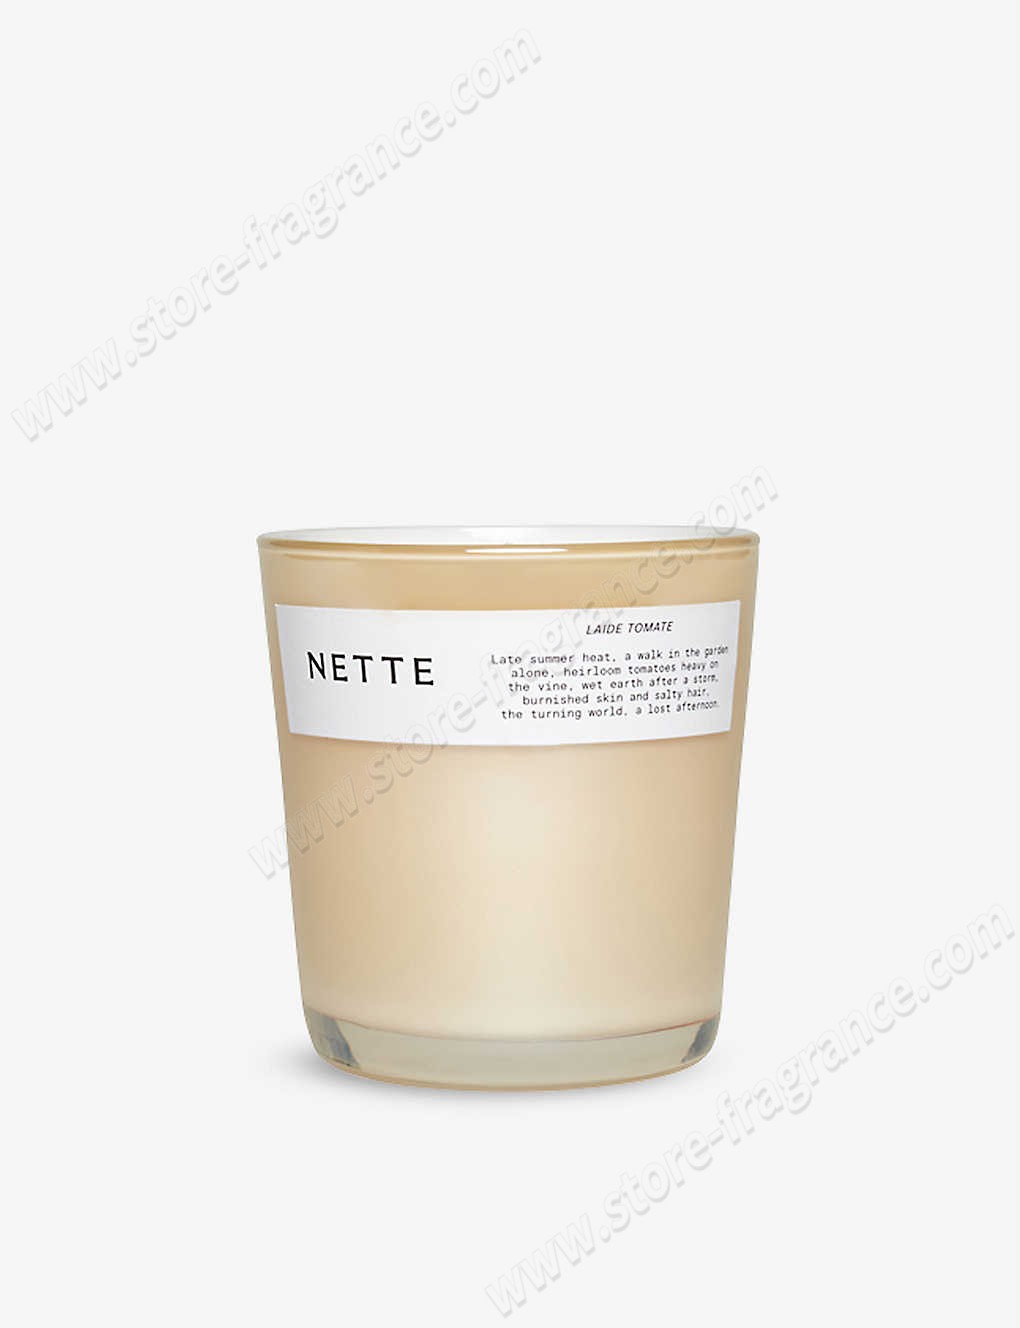 NETTE/Laide Tomate scented candle 20.6oz ✿ Discount Store - NETTE/Laide Tomate scented candle 20.6oz ✿ Discount Store